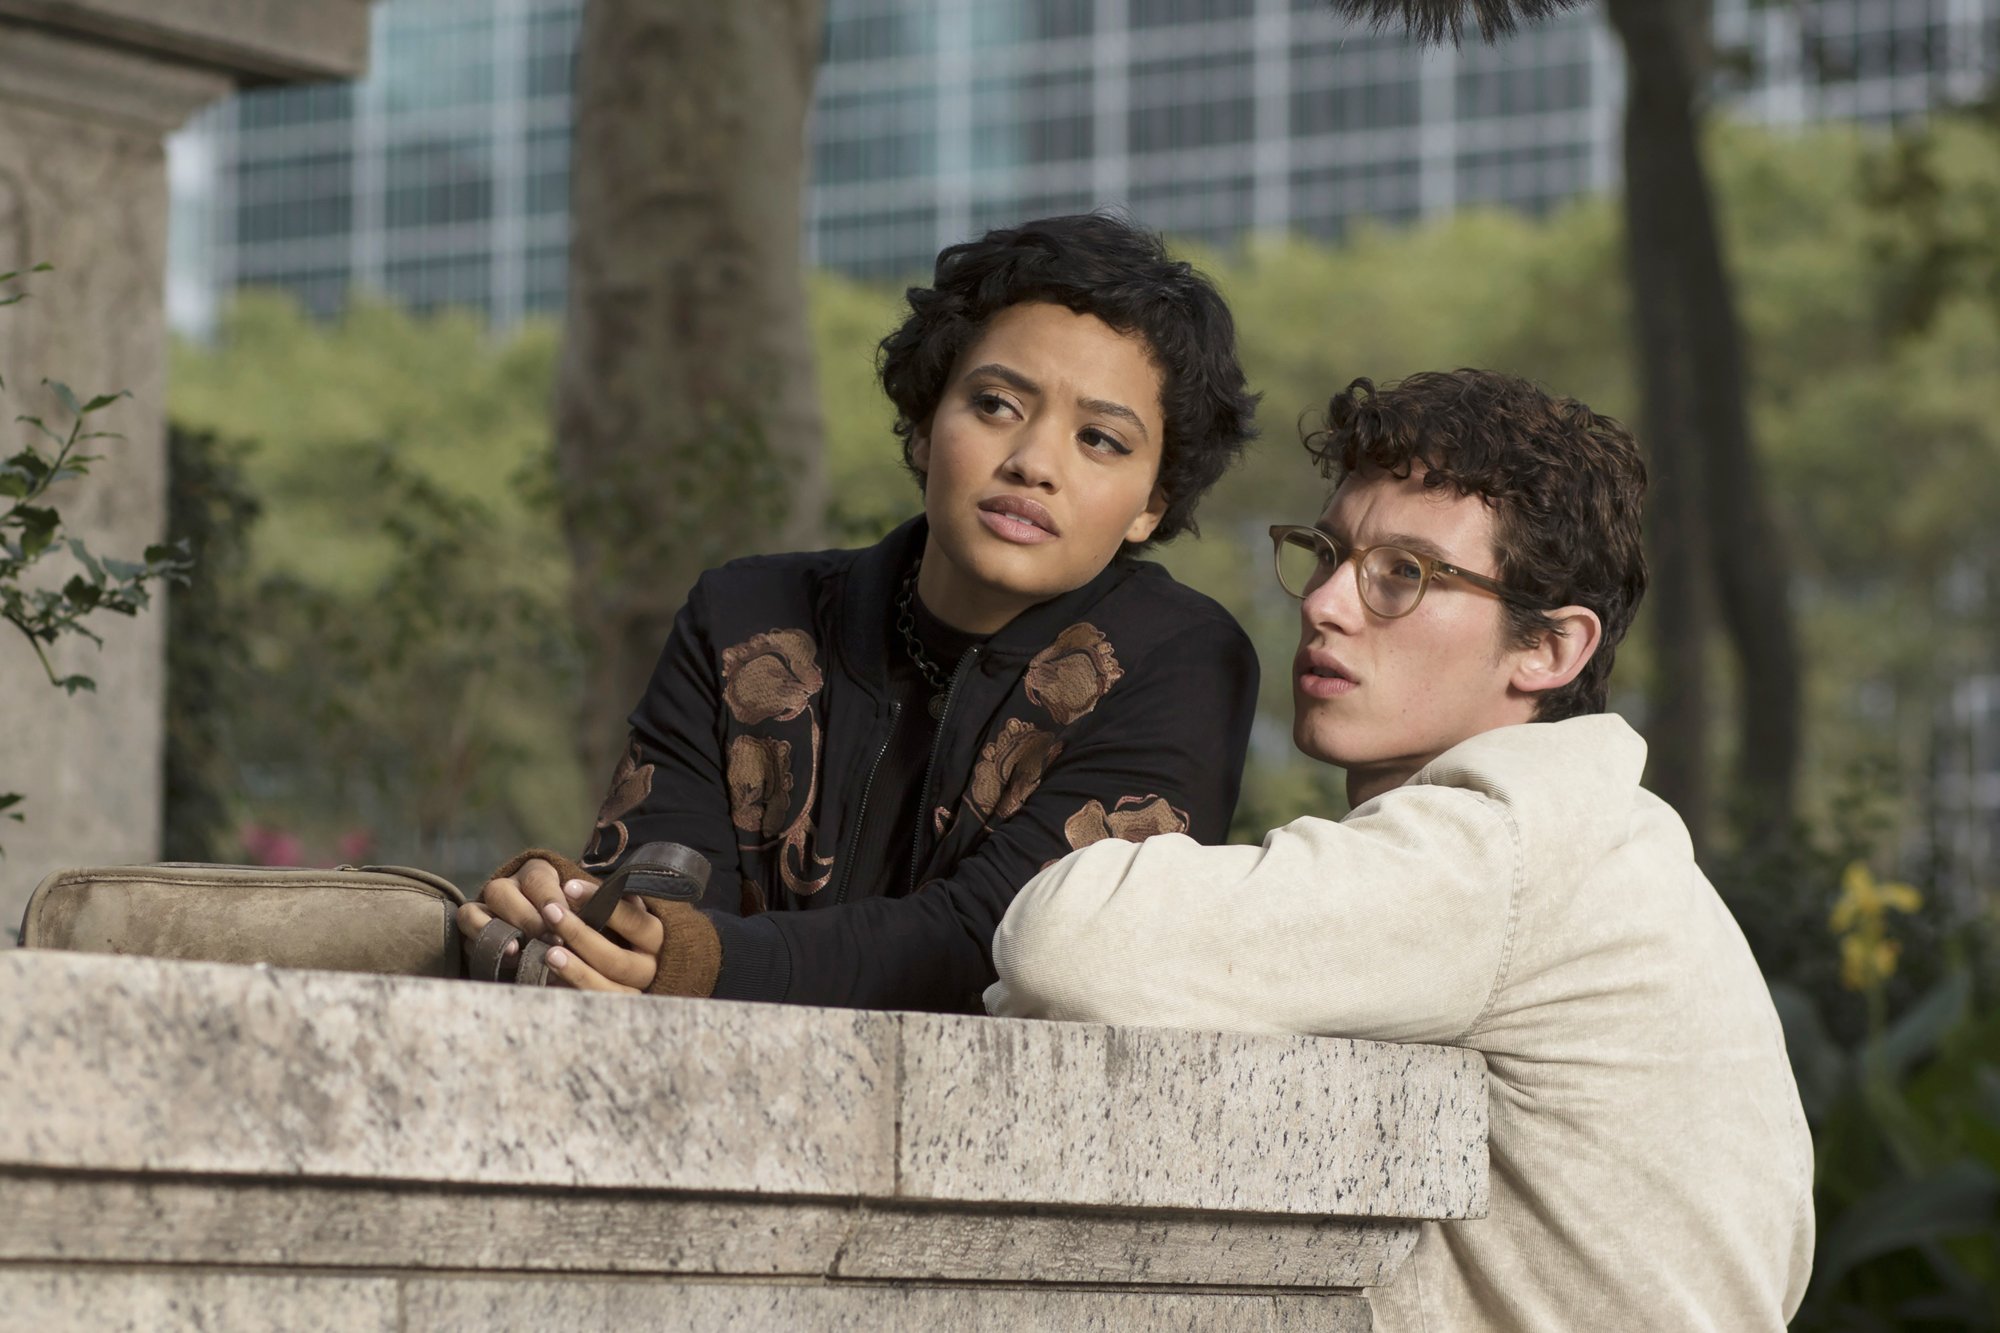 Kiersey Clemons stars as Mimi Pastori and Callum Turner stars as Thomas in Amazon Studios' The Only Living Boy in New York (2017)